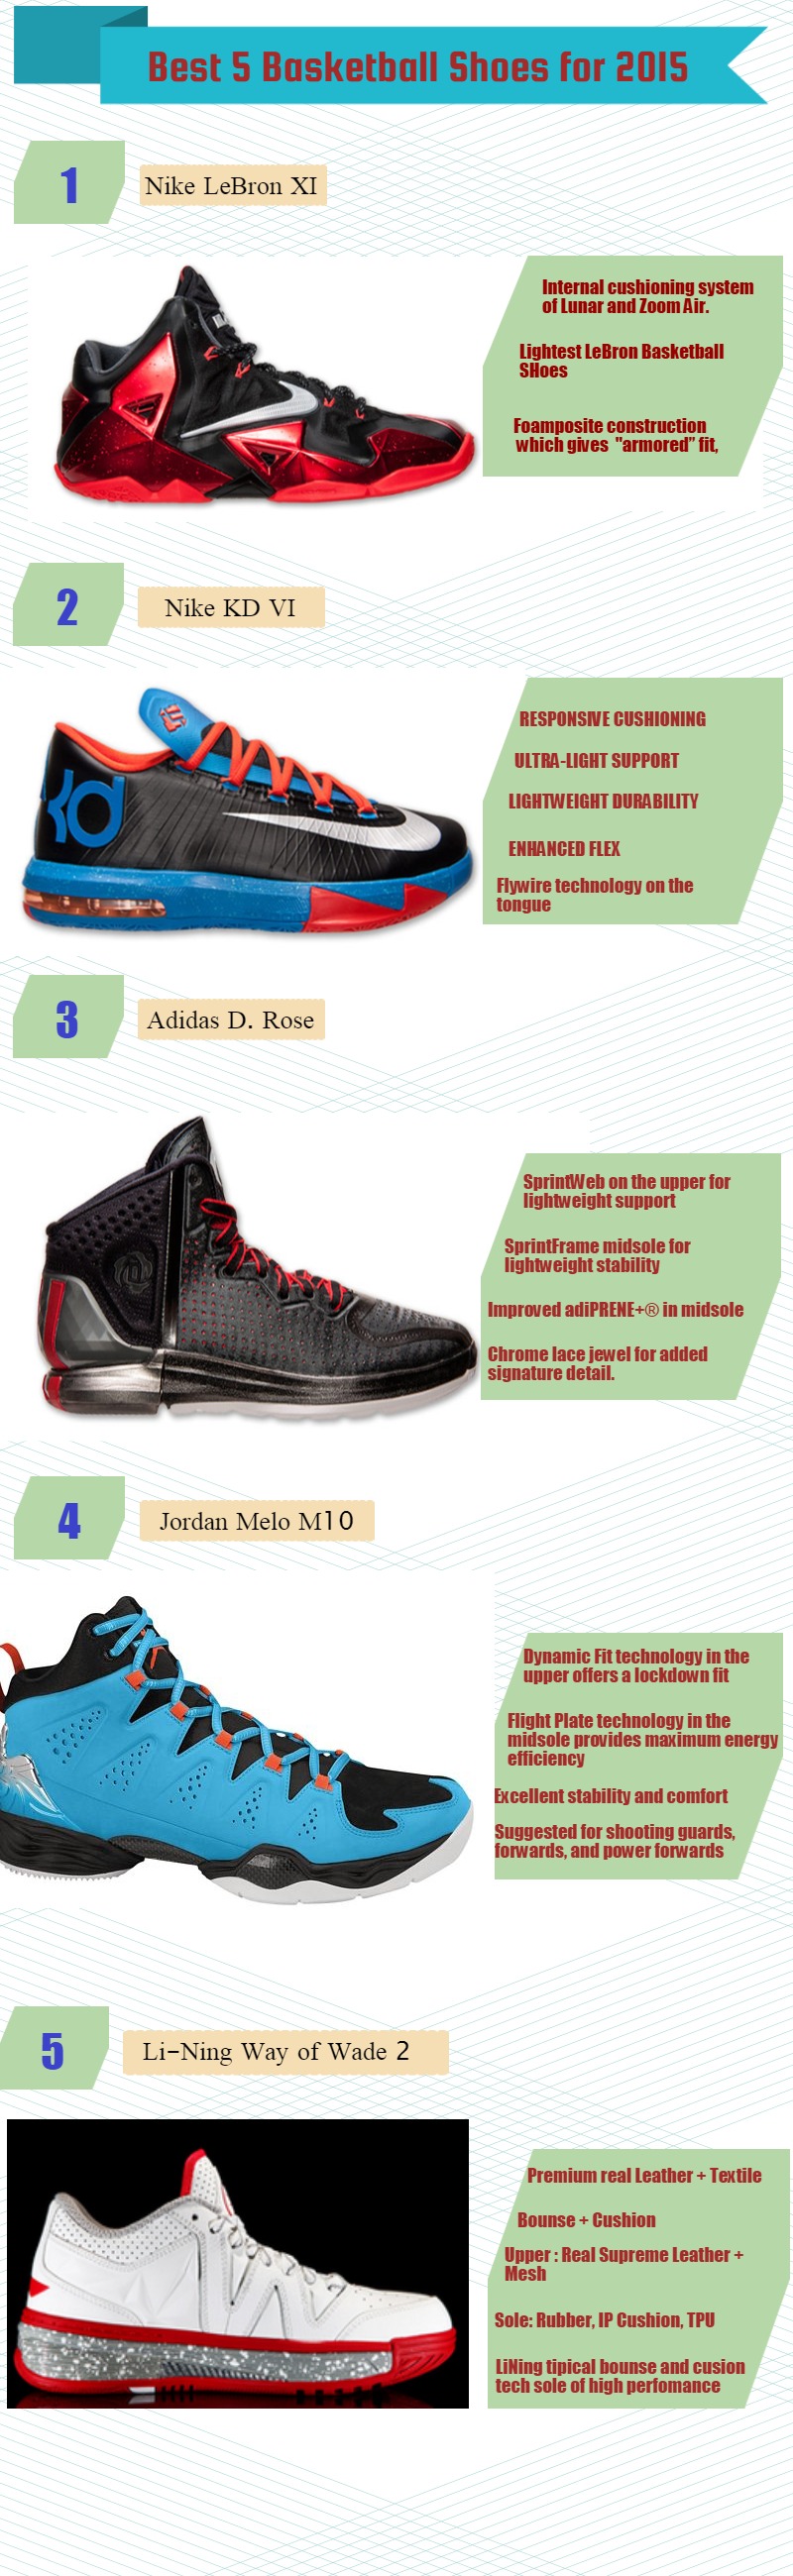 research on basketball shoes